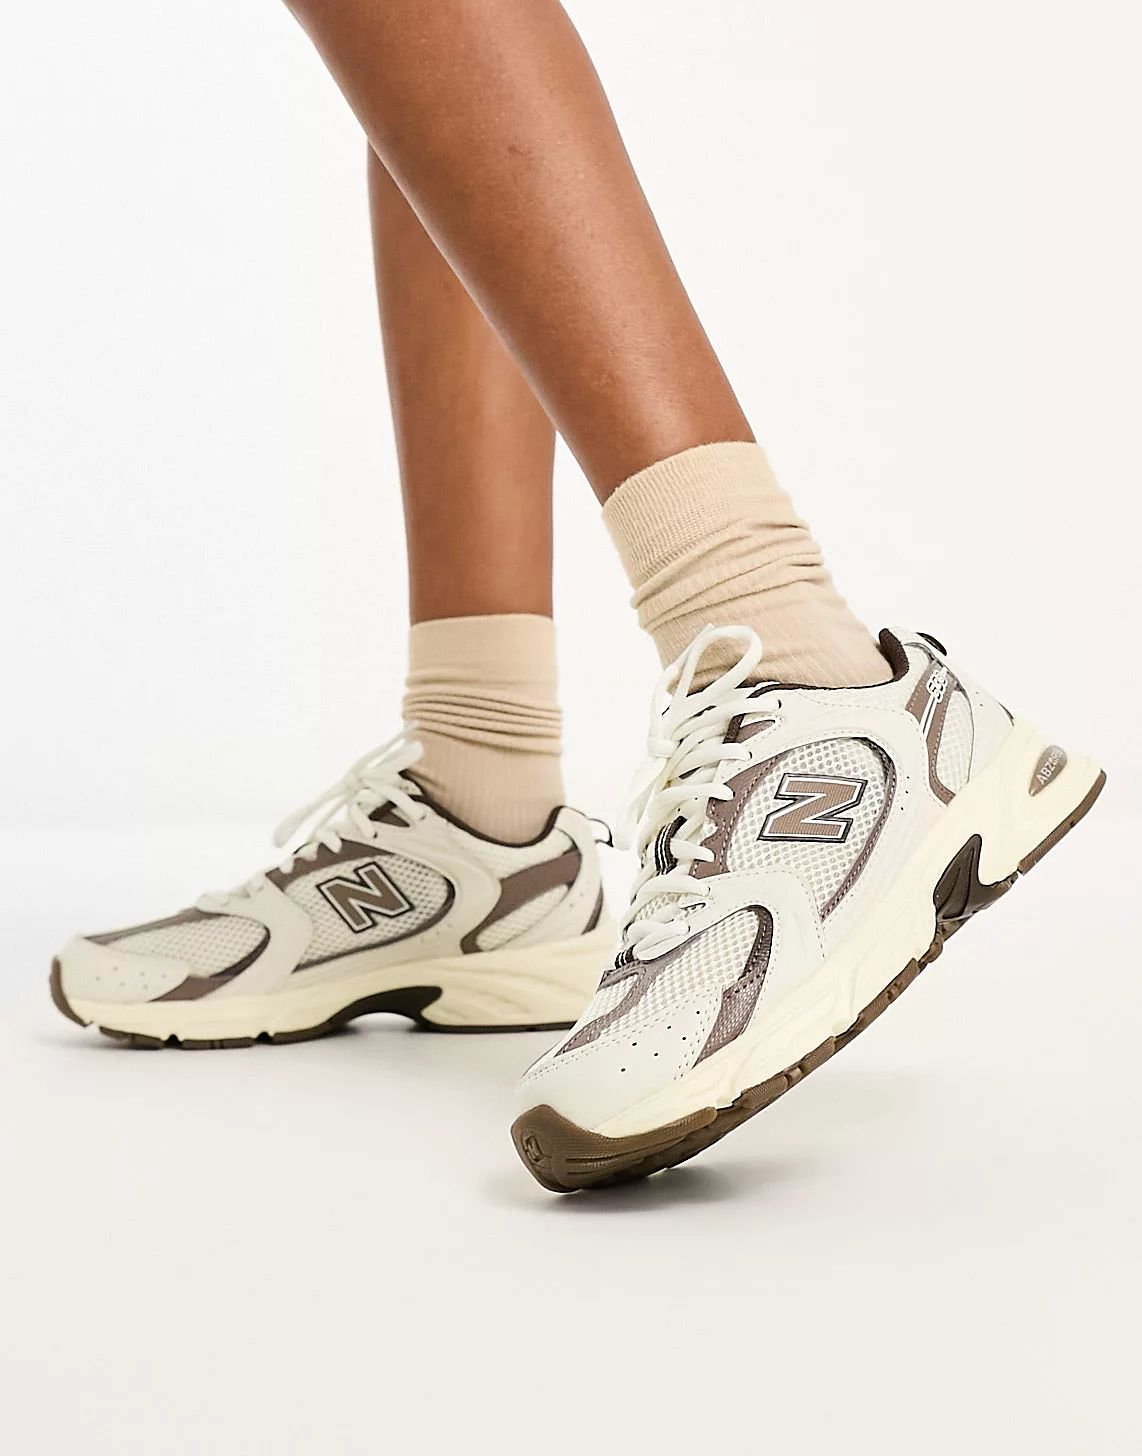 New Balance 530 sneakers in stone - Exclusive to ASOS | ASOS (Global)